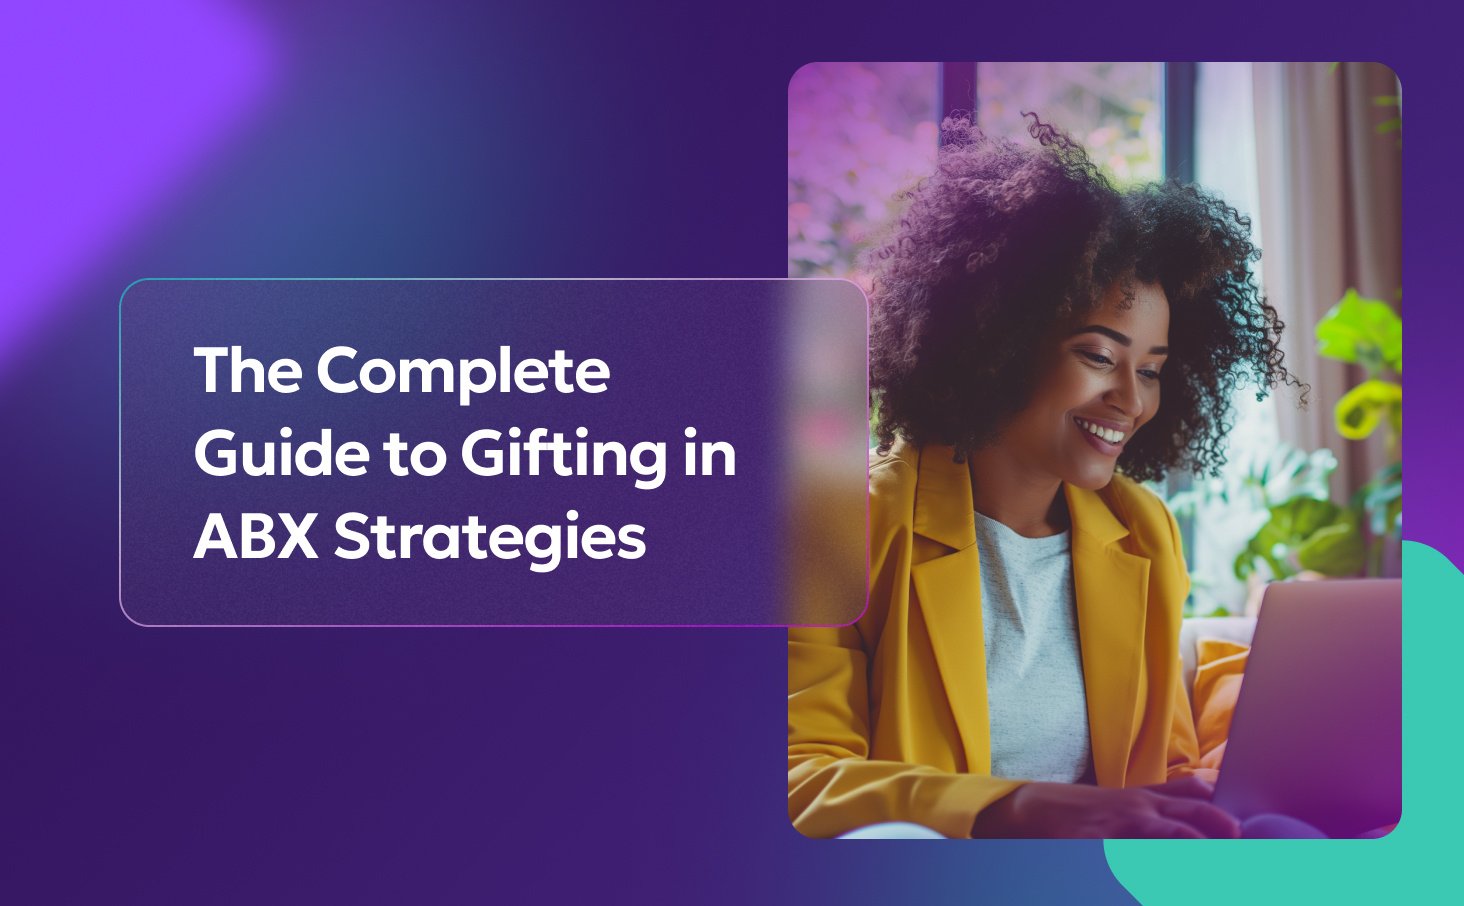 The Complete Guide to Gifting in ABX Strategies